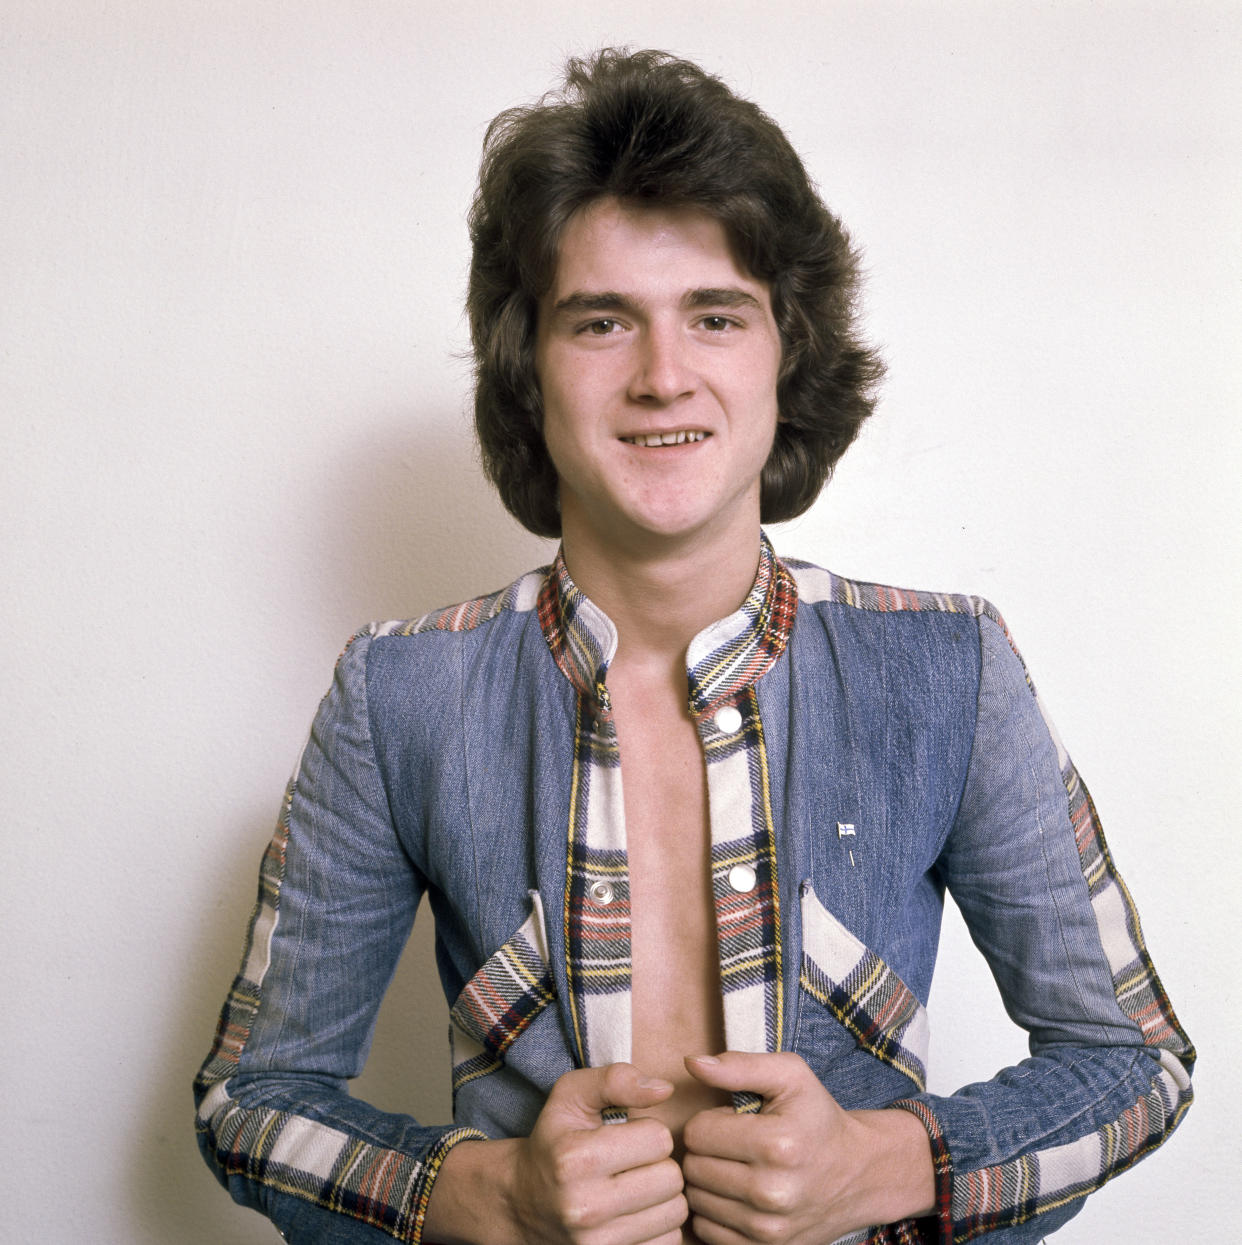 Les McKeown of the Bay City Rollers in 1975. (Photo: Jorgen Angel/Redferns)